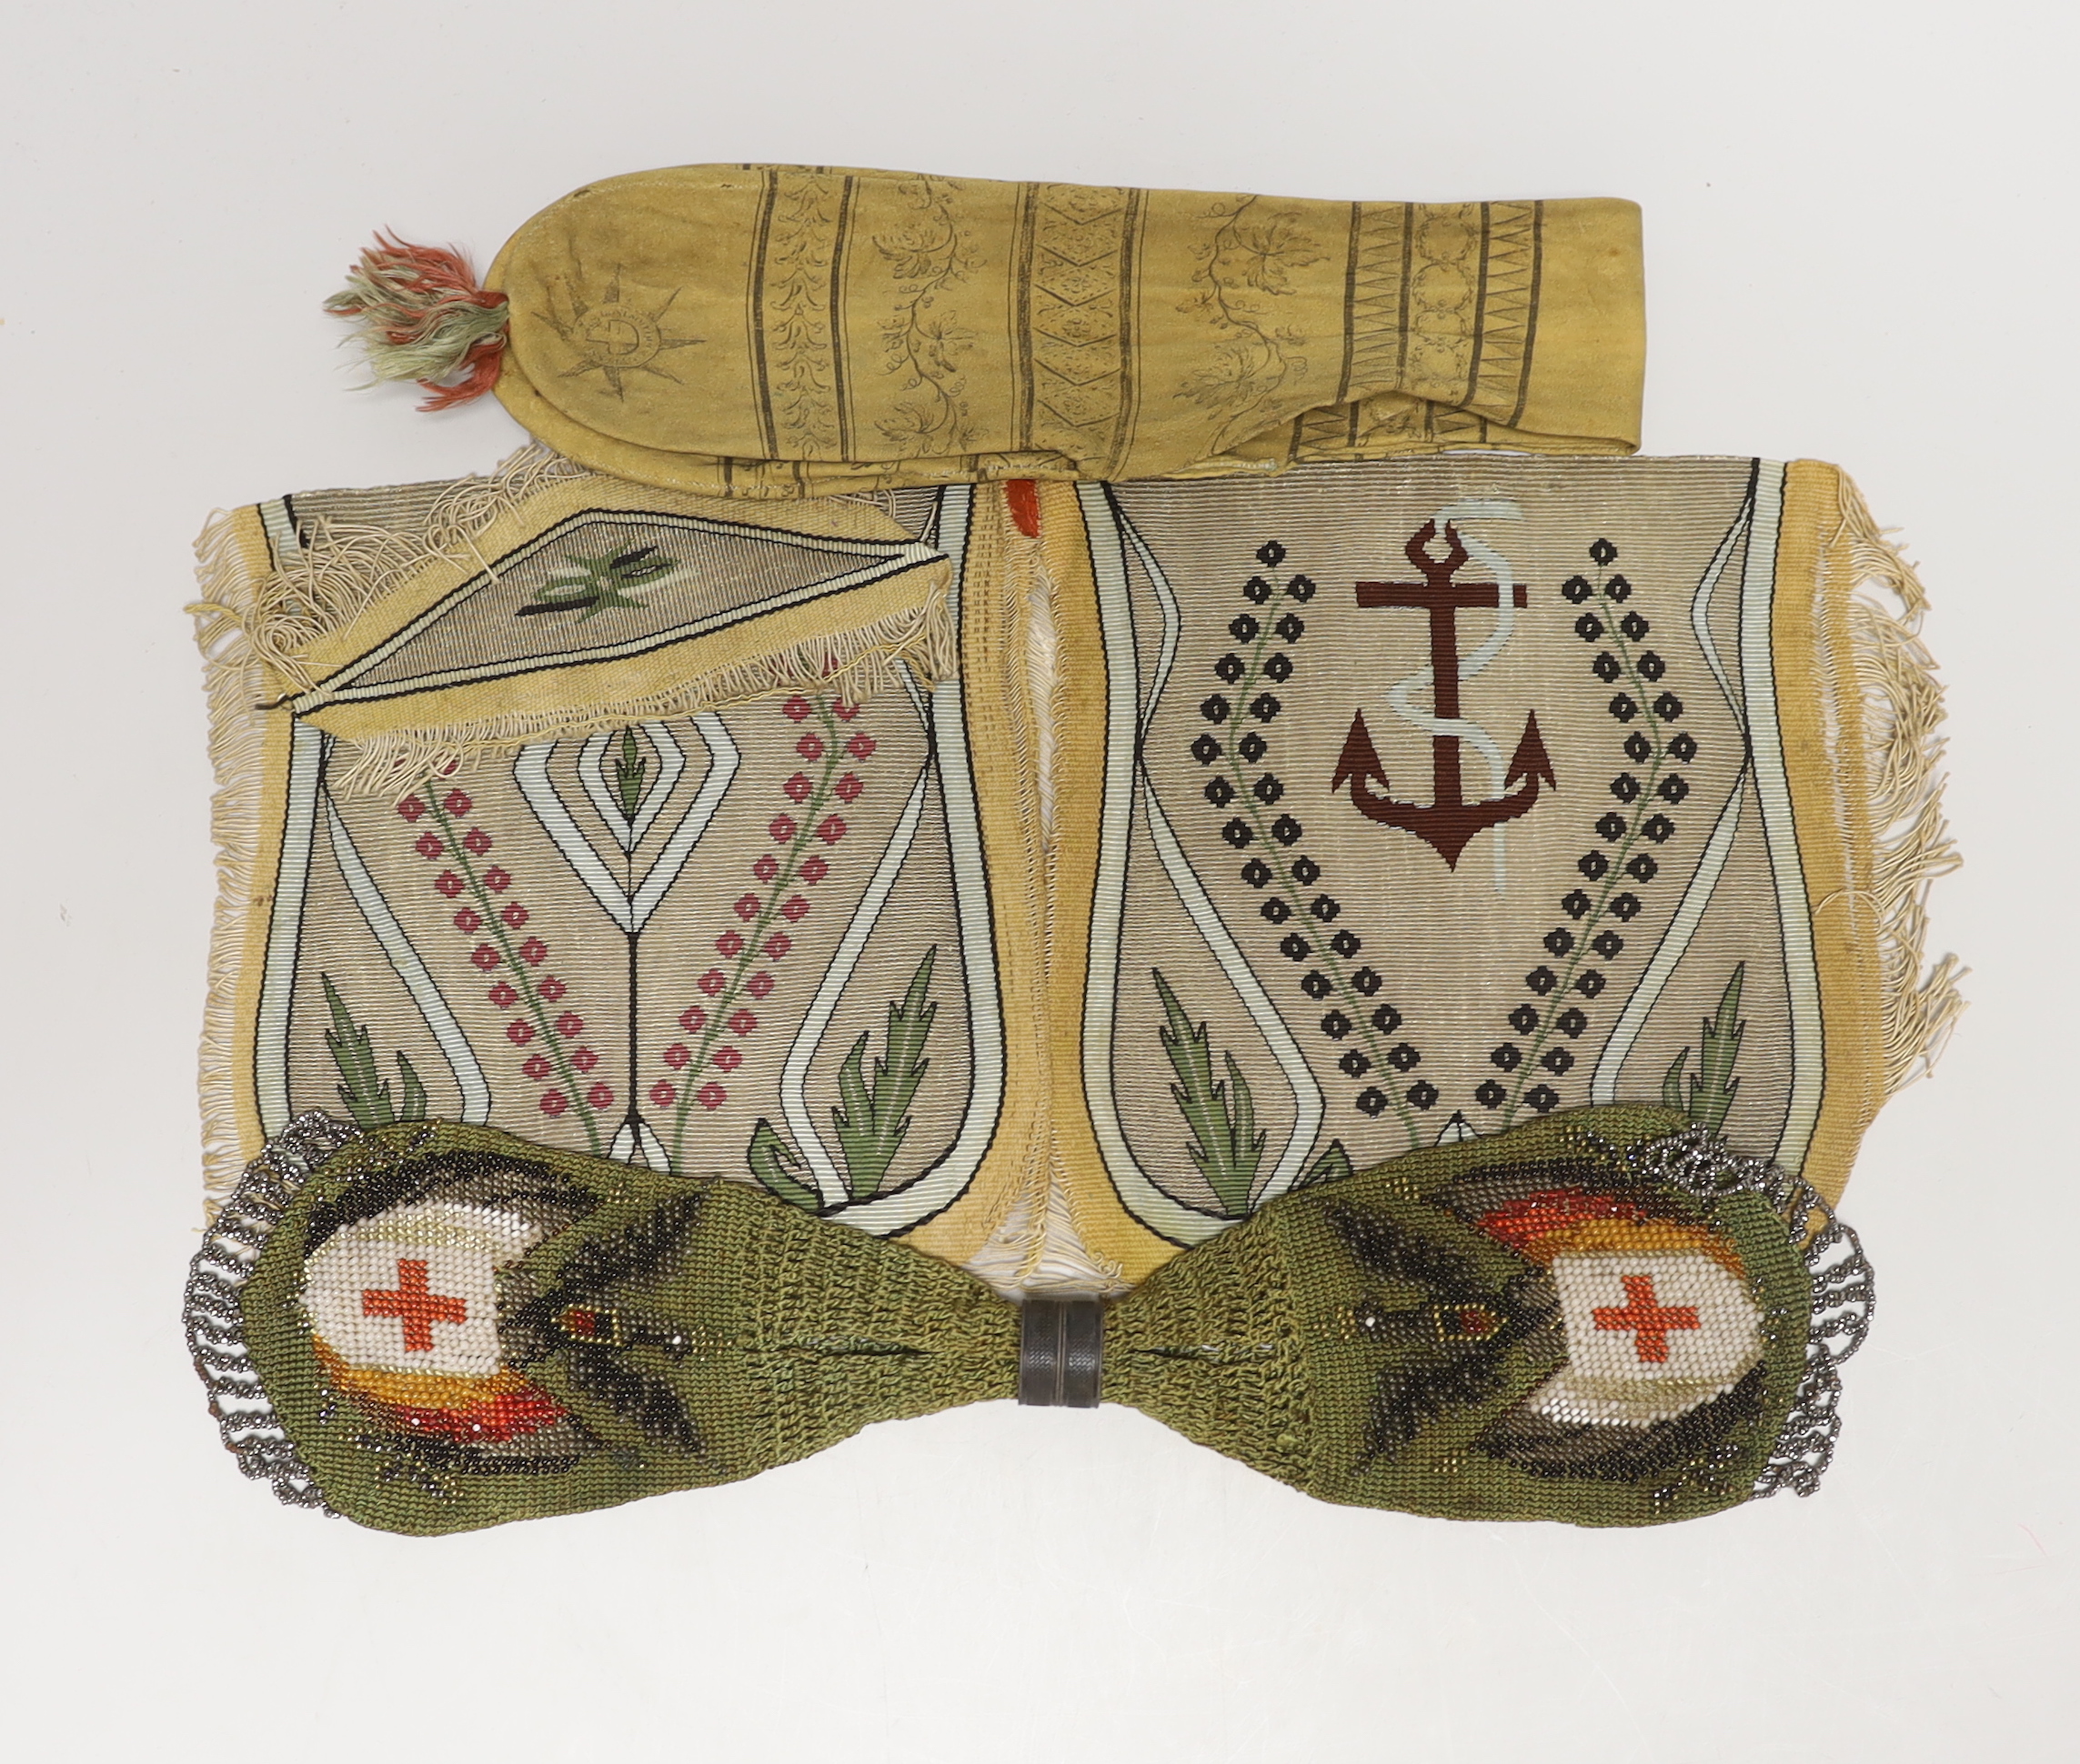 An 18th century American leather misers purse dated 1793, an unused finely woven tapestry, an early 19th century bead worked misers purse, longest misers purse 48cm